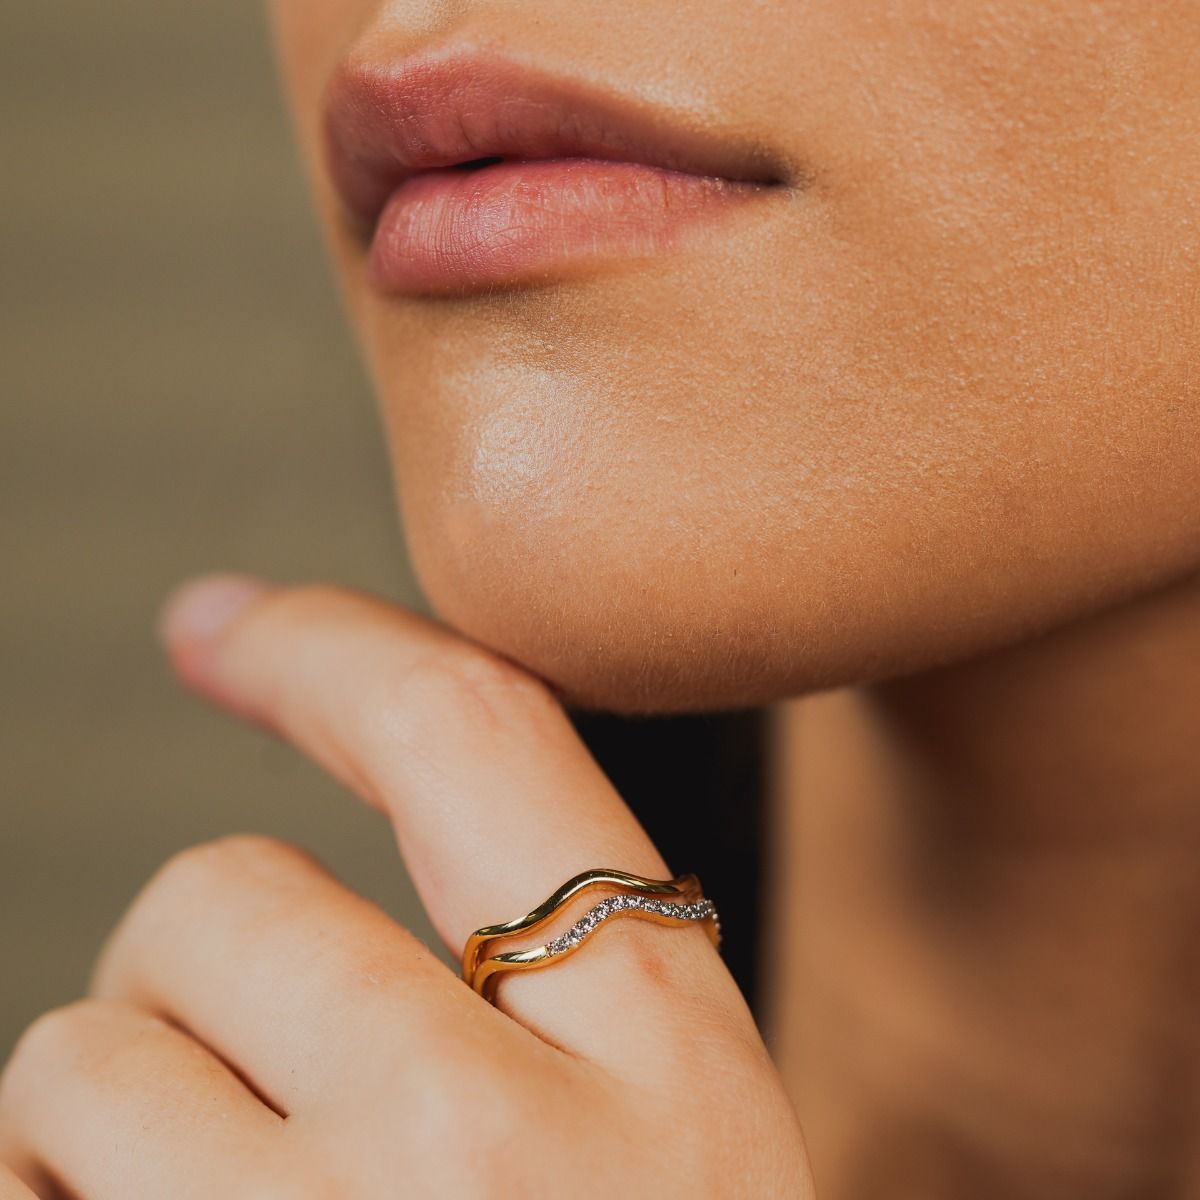 Elegantly crafted, the Two-Tone Double Pave Wave Ring combines a polished wave band with a two-tone pave wave band. This chic design offers both comfort and contrast, gracing your finger with timeless style and sophistication.